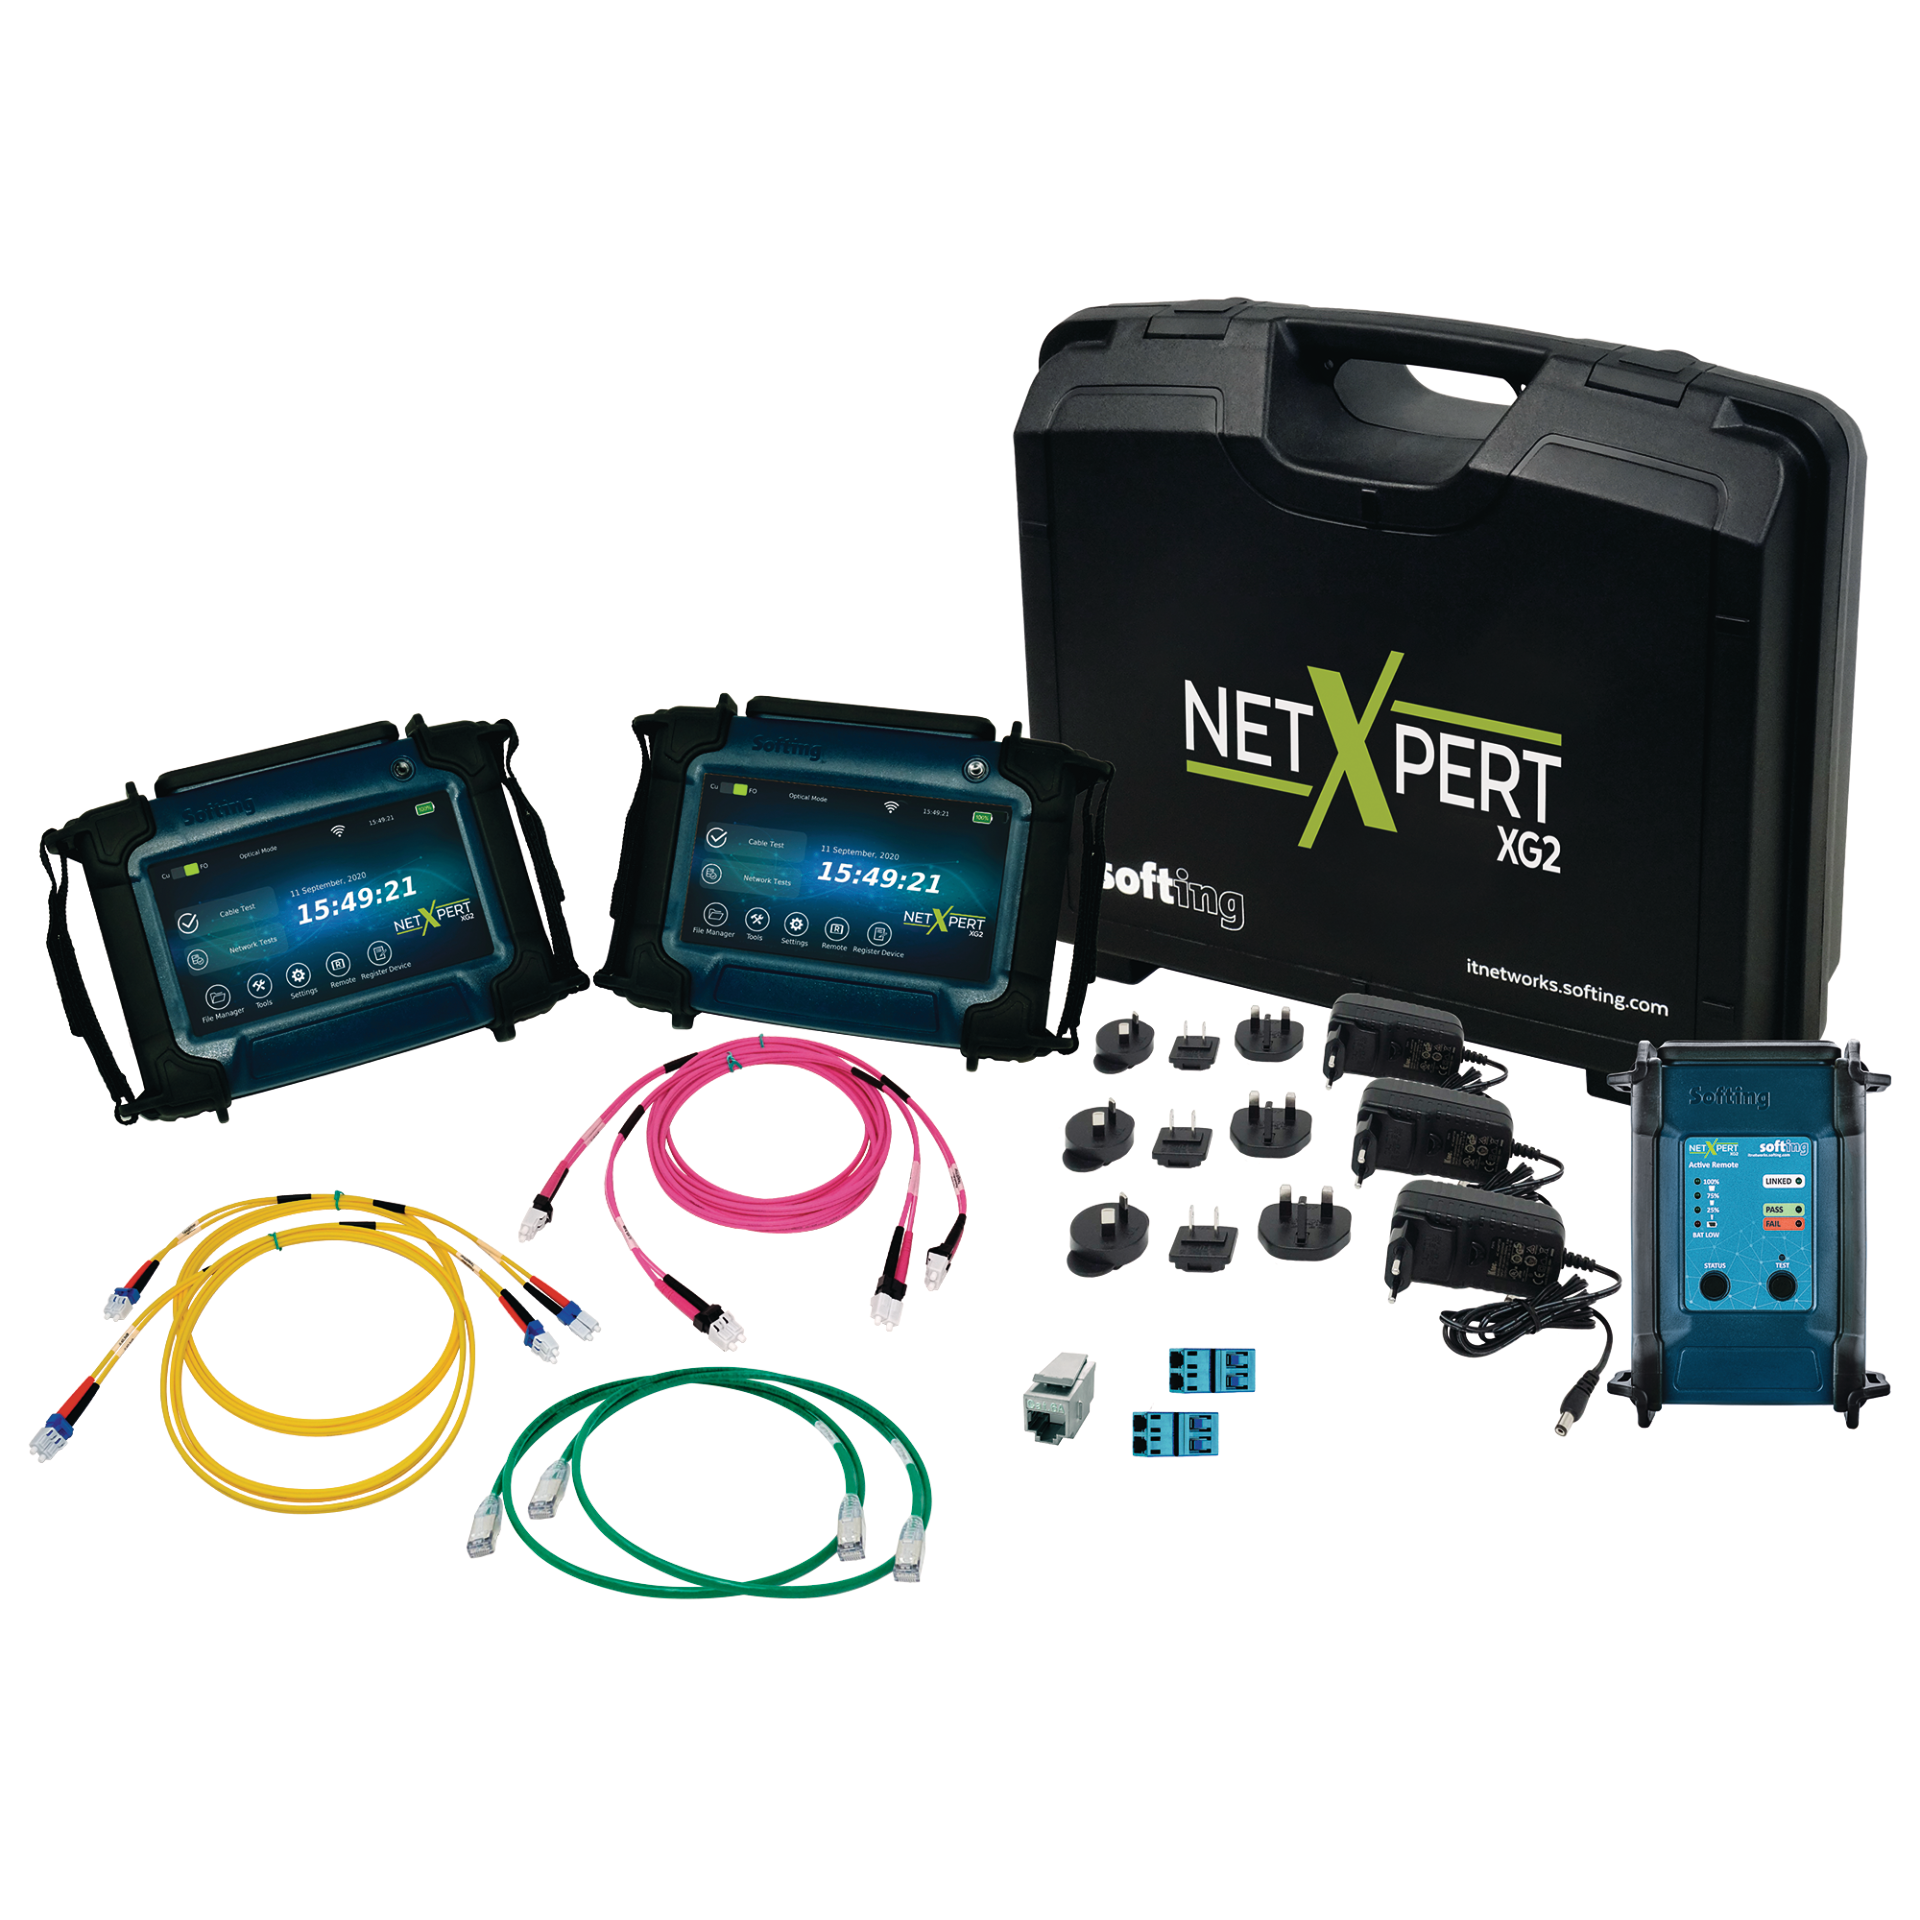 NetXpert XG2 PLUS up to10GBit/s, Network-/Cabling-,Qualifier